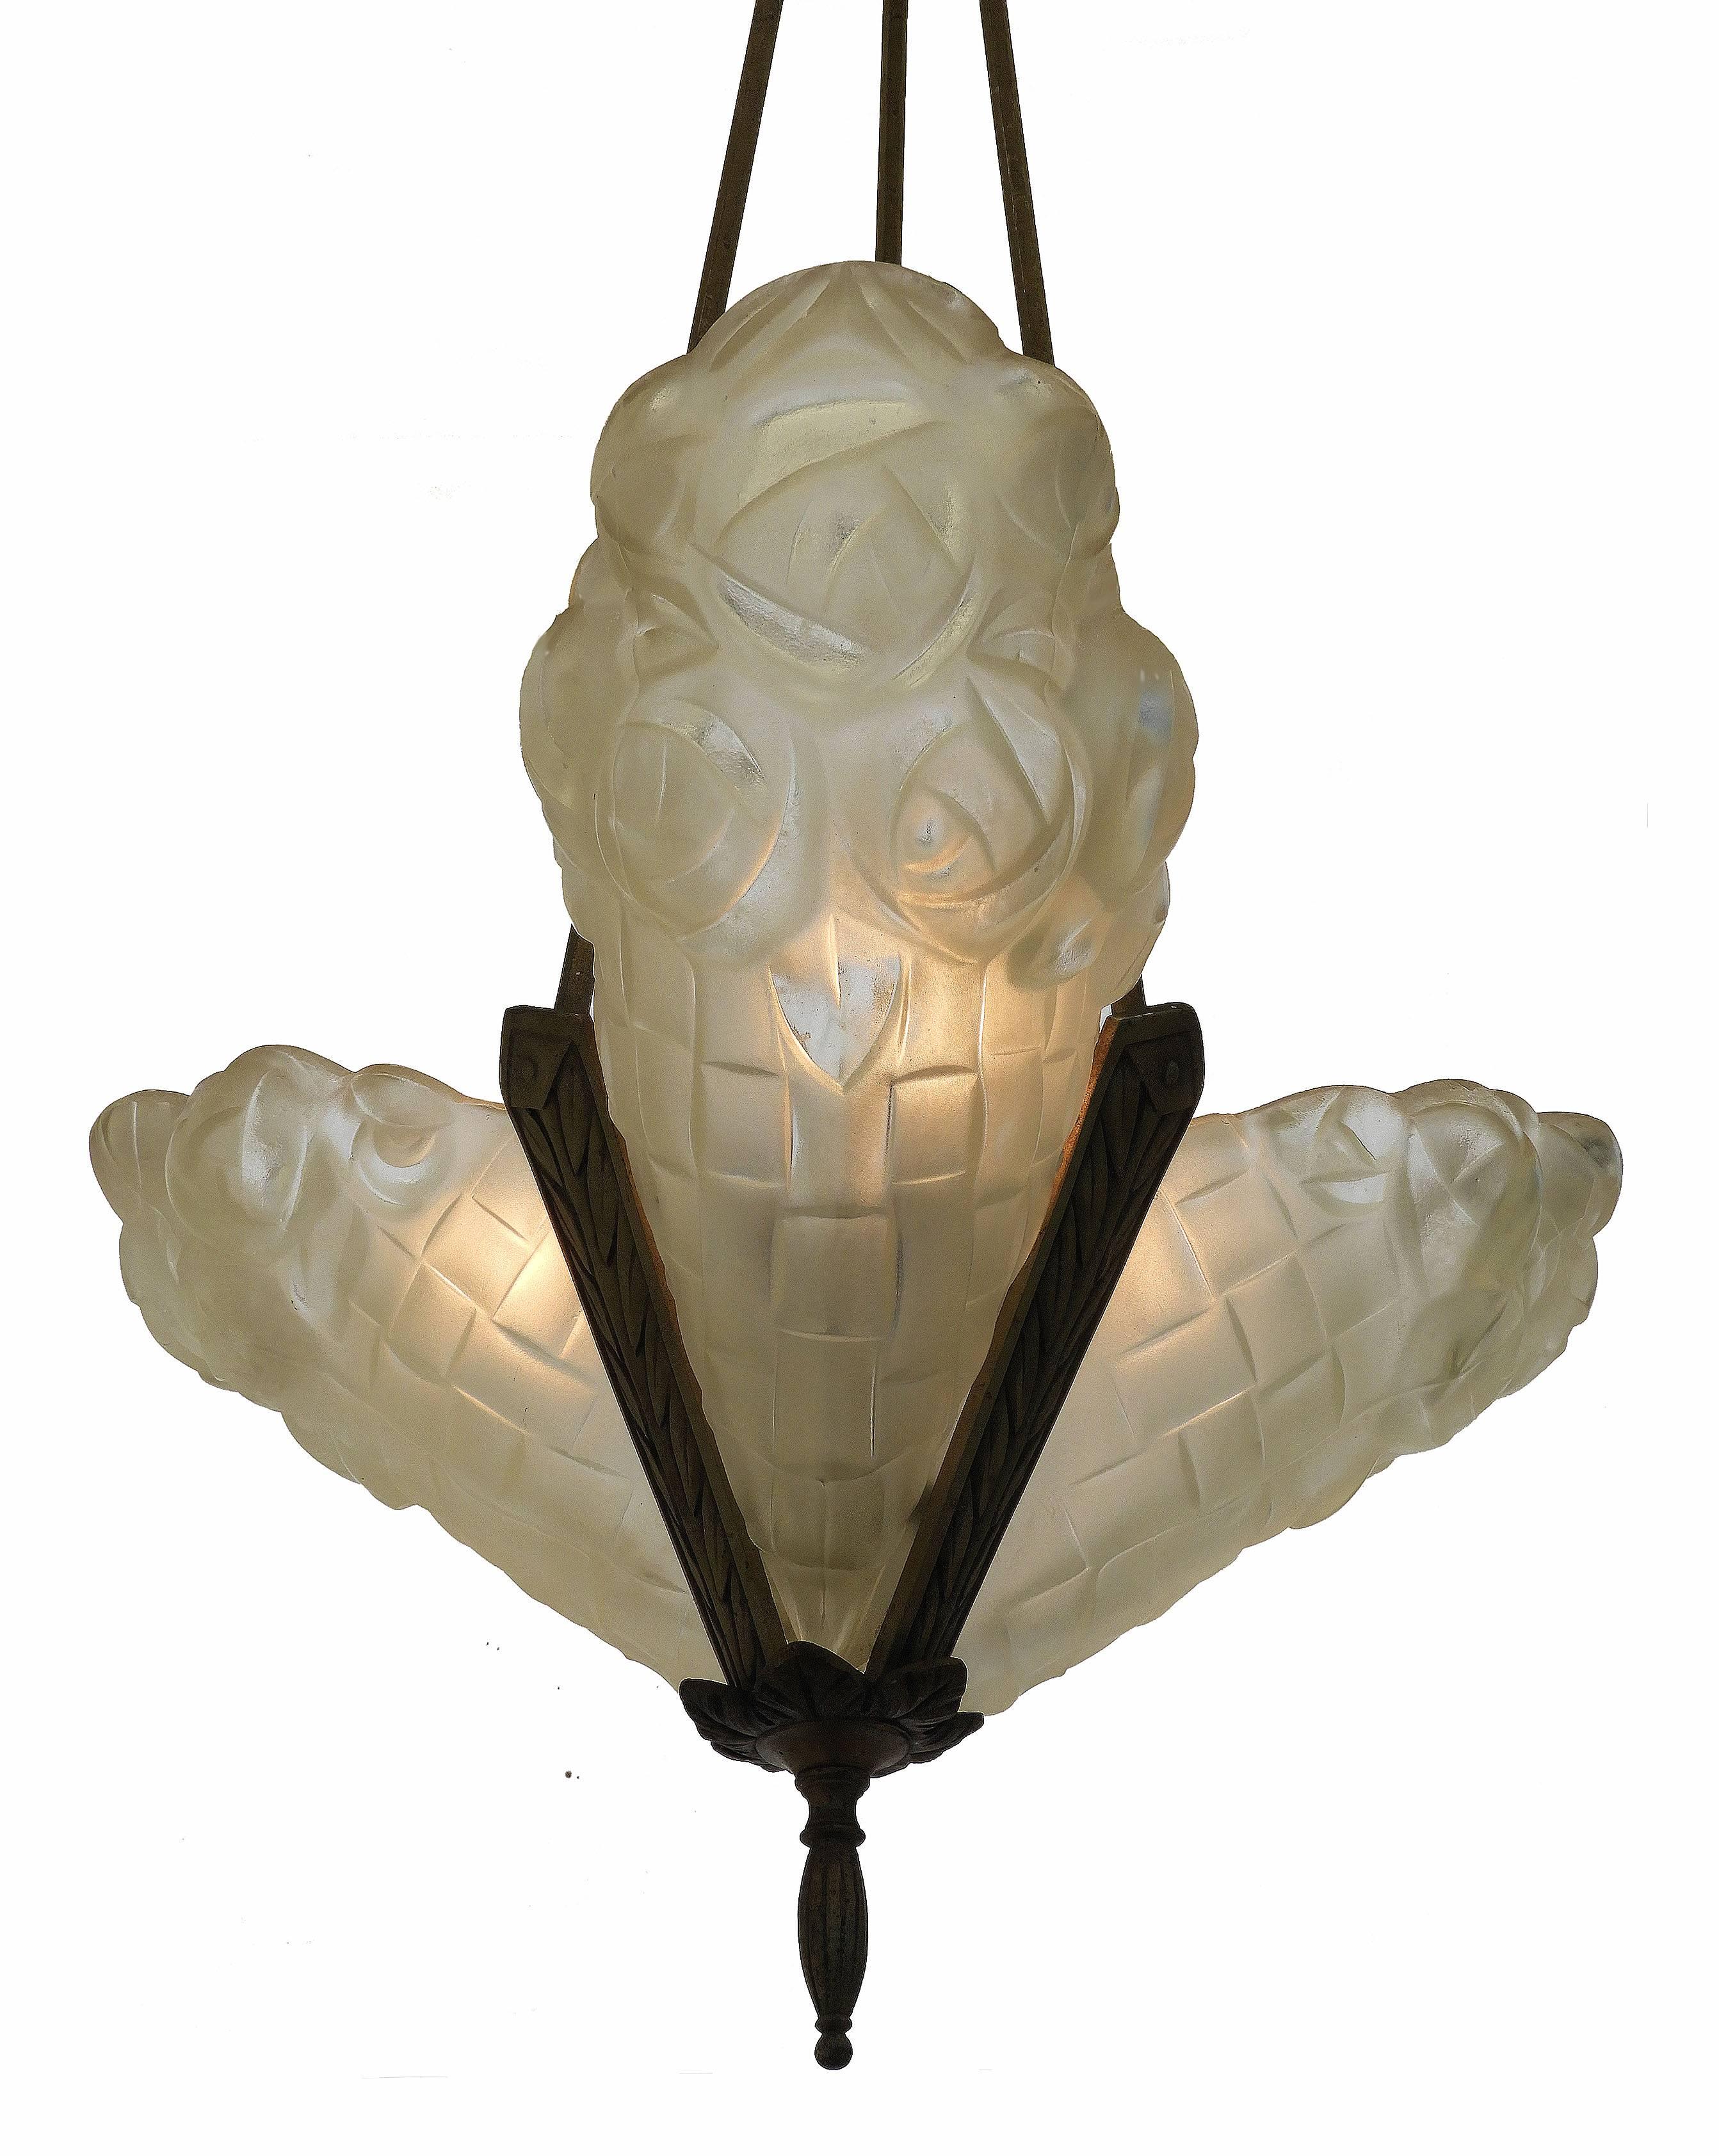 Art Deco chandelier signed Degue French glass pendant light
This will be re-wired and tested to USA or UK and European standards ready to install, or for your country or specifications please ask
We have left this in it's original condition